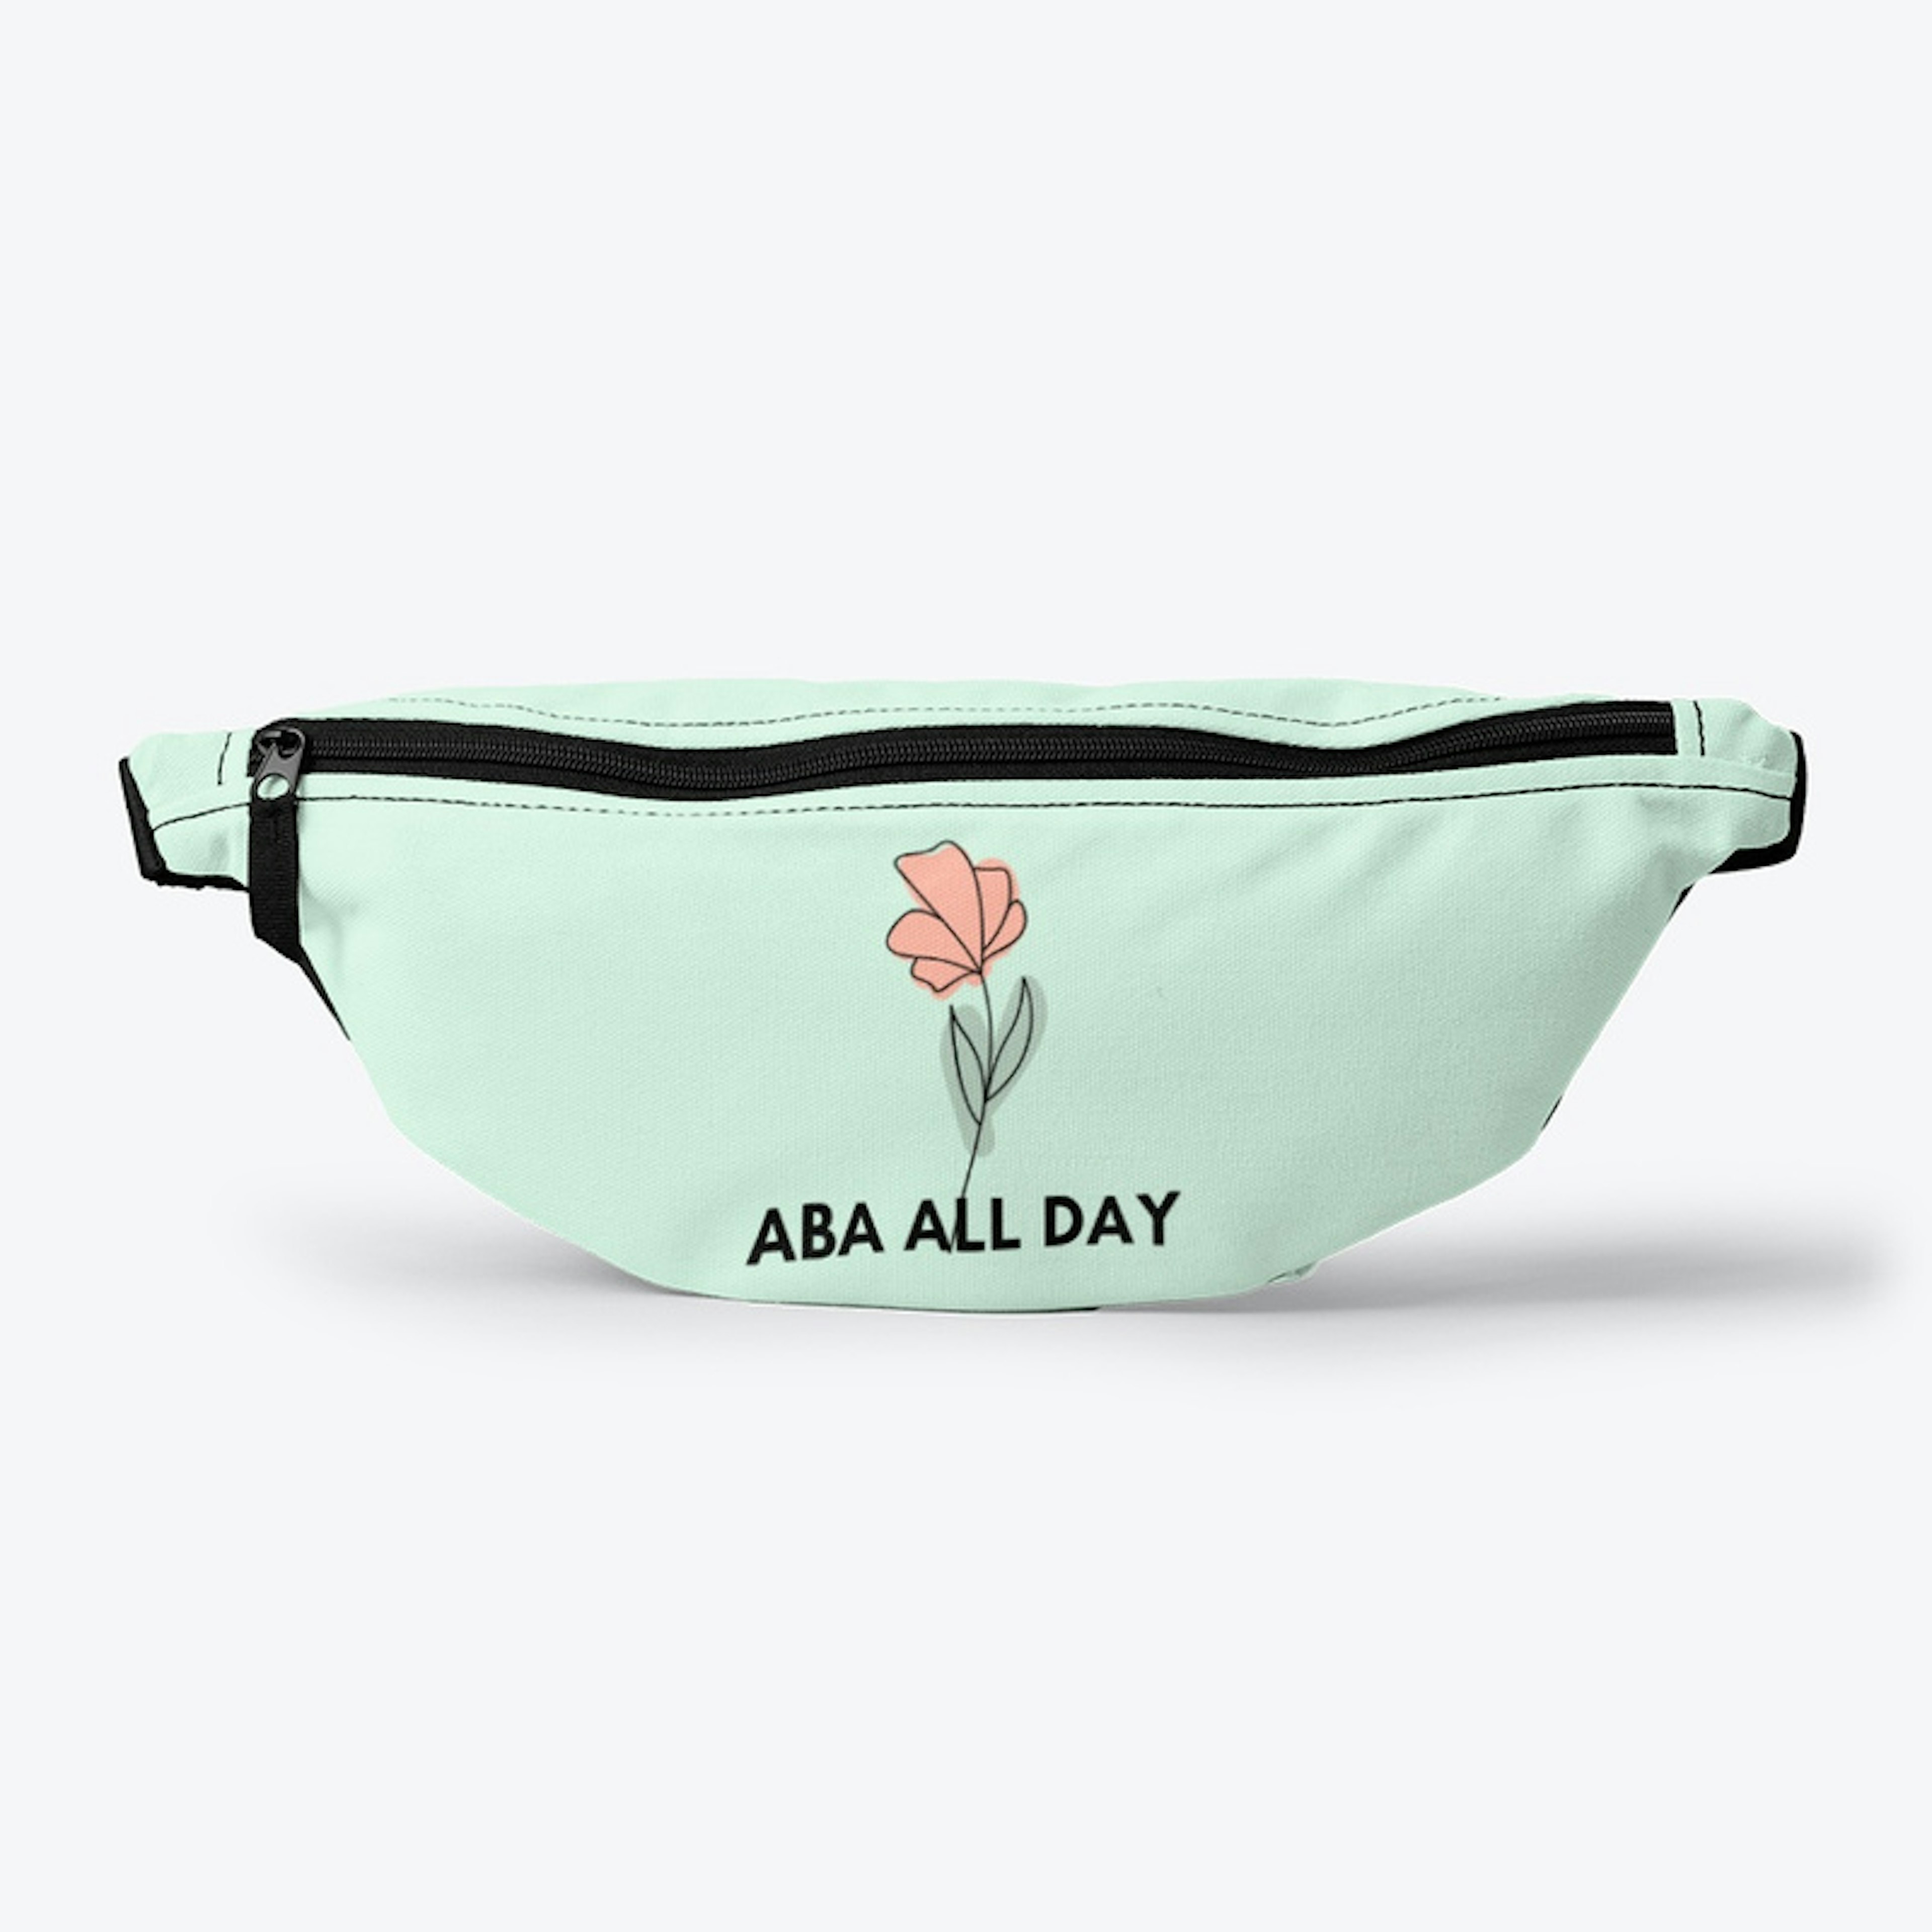 ABA all day fanny pack